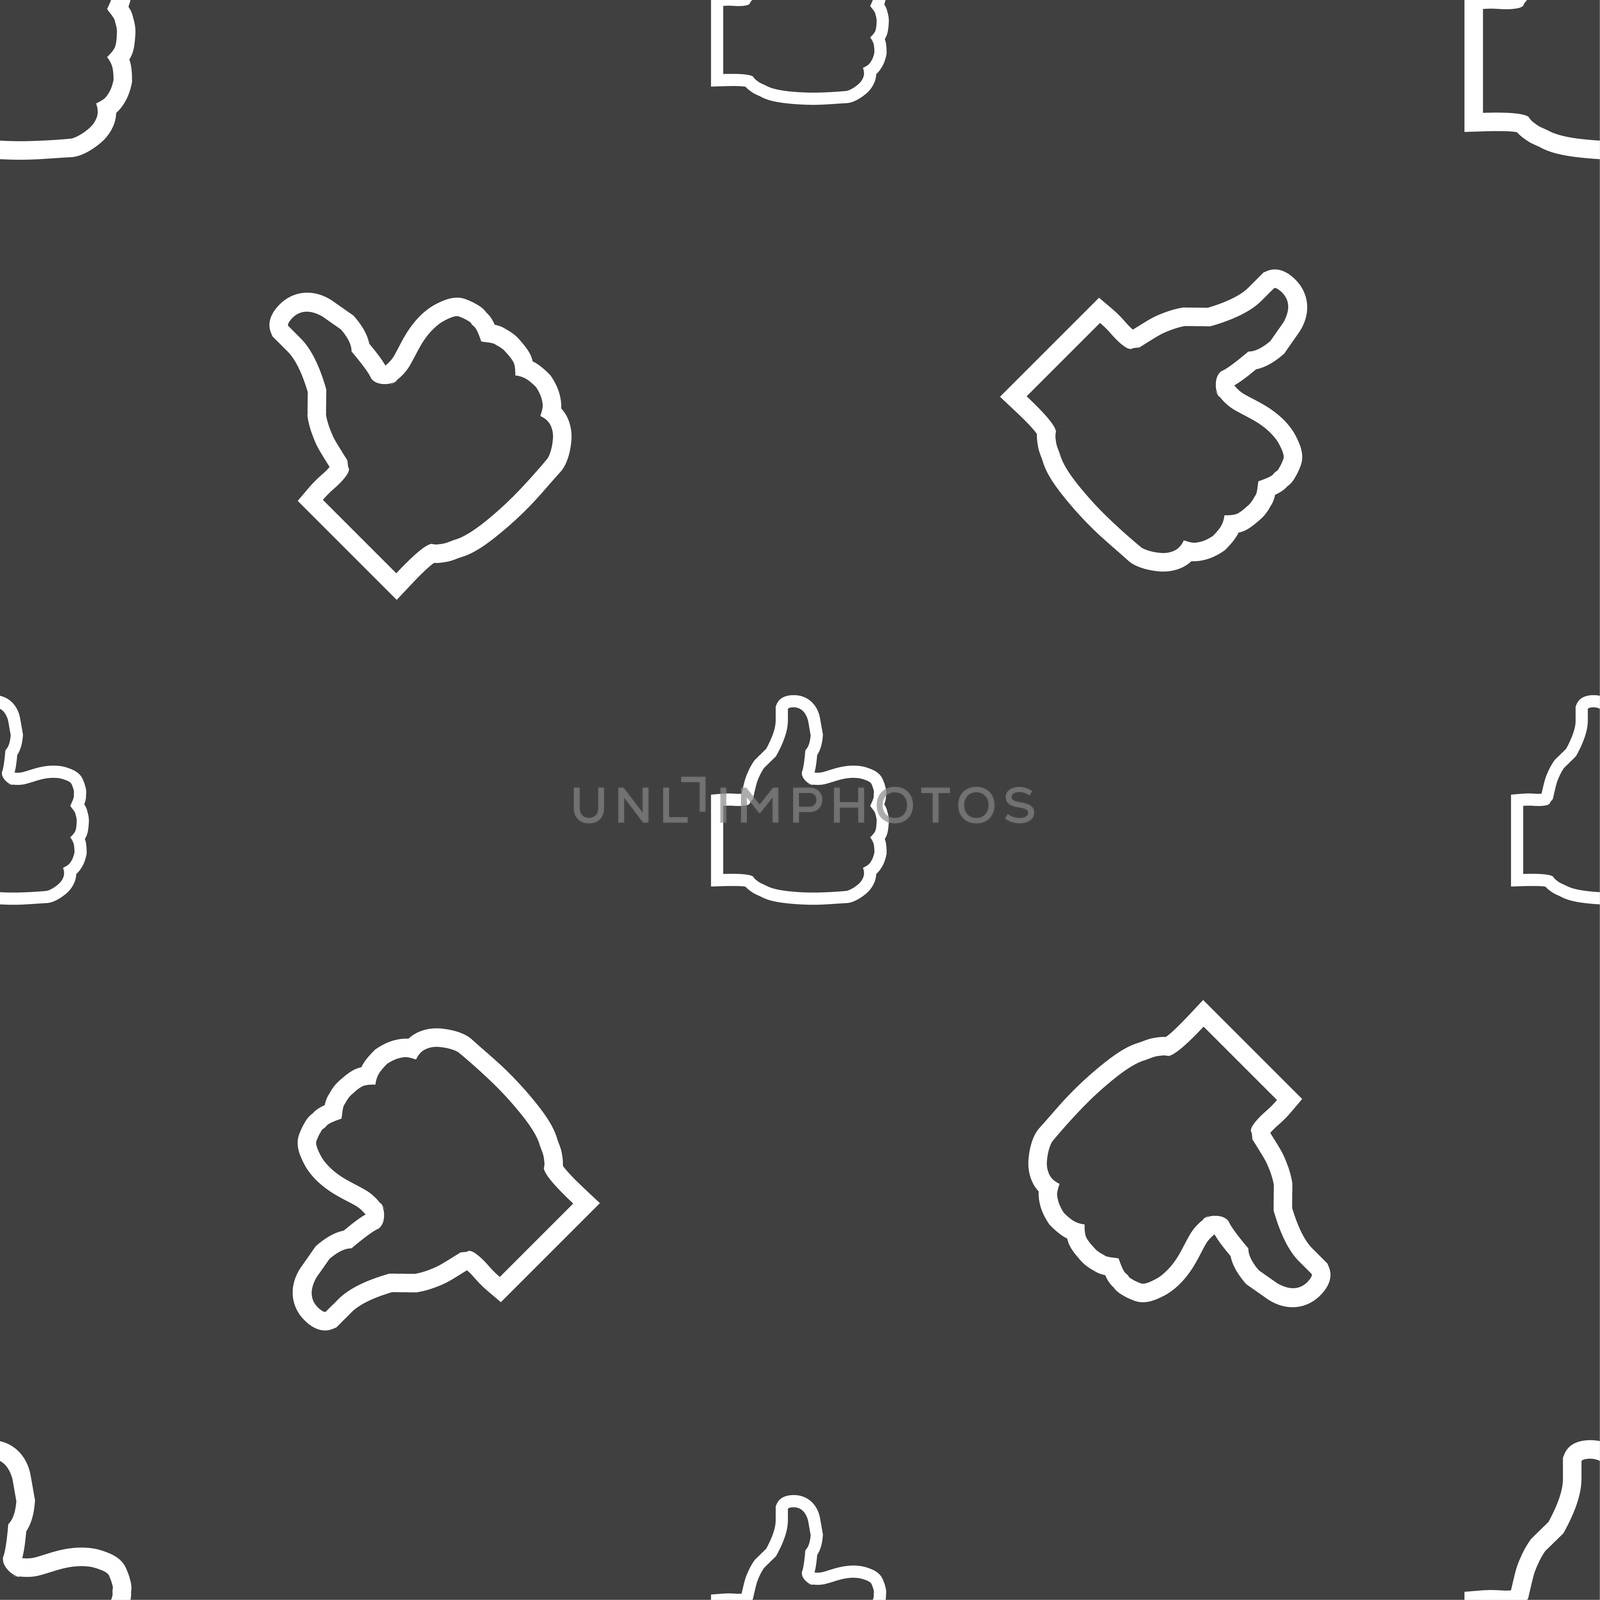 Like icon sign. Seamless pattern on a gray background. illustration